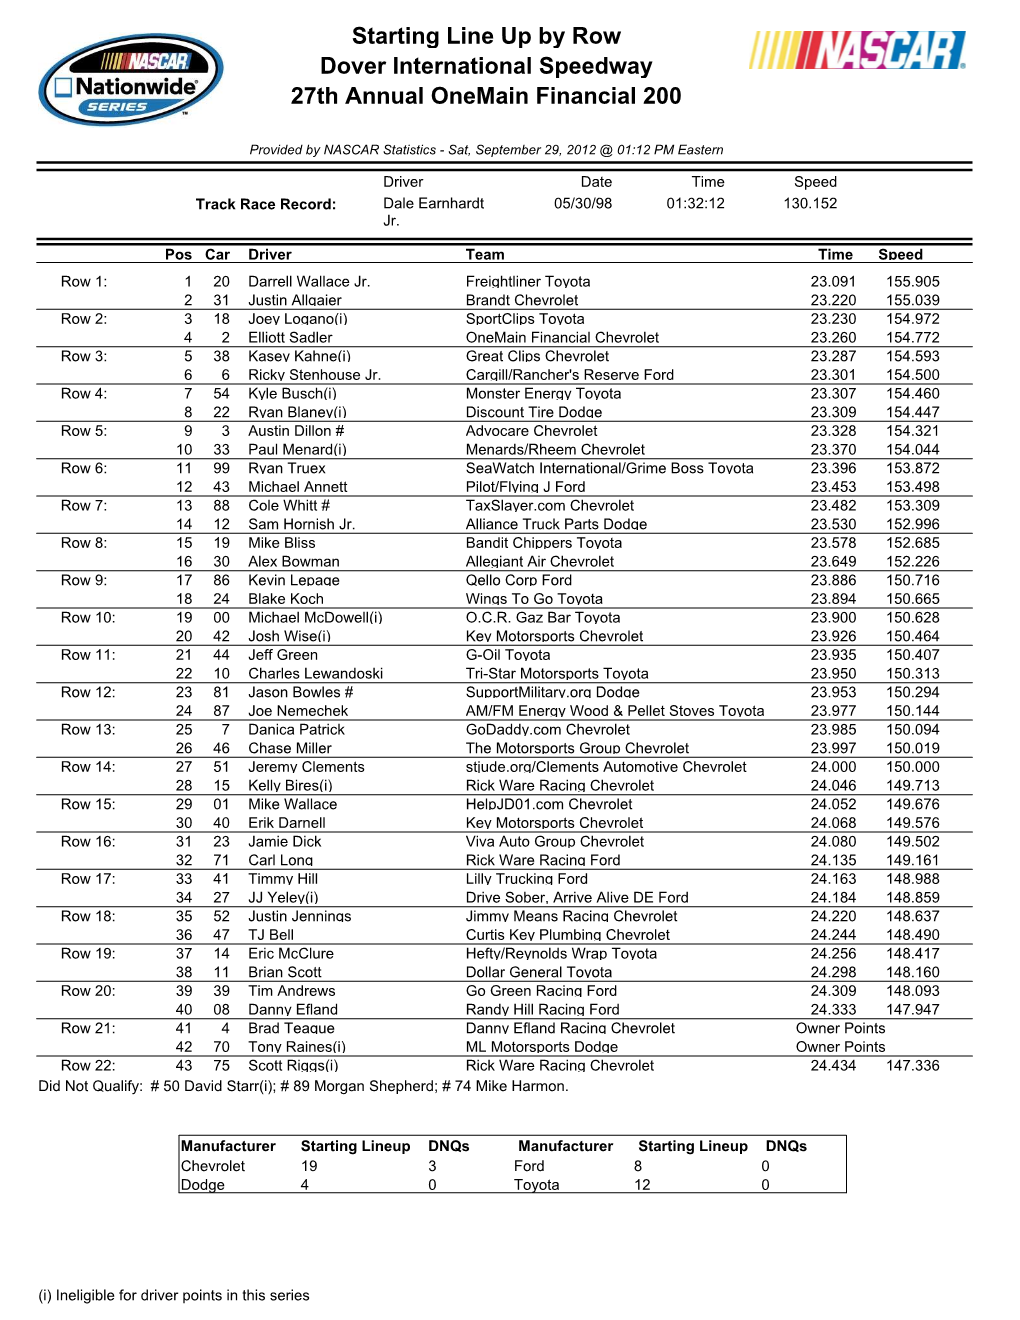 Starting Line up by Row Dover International Speedway 27Th Annual Onemain Financial 200